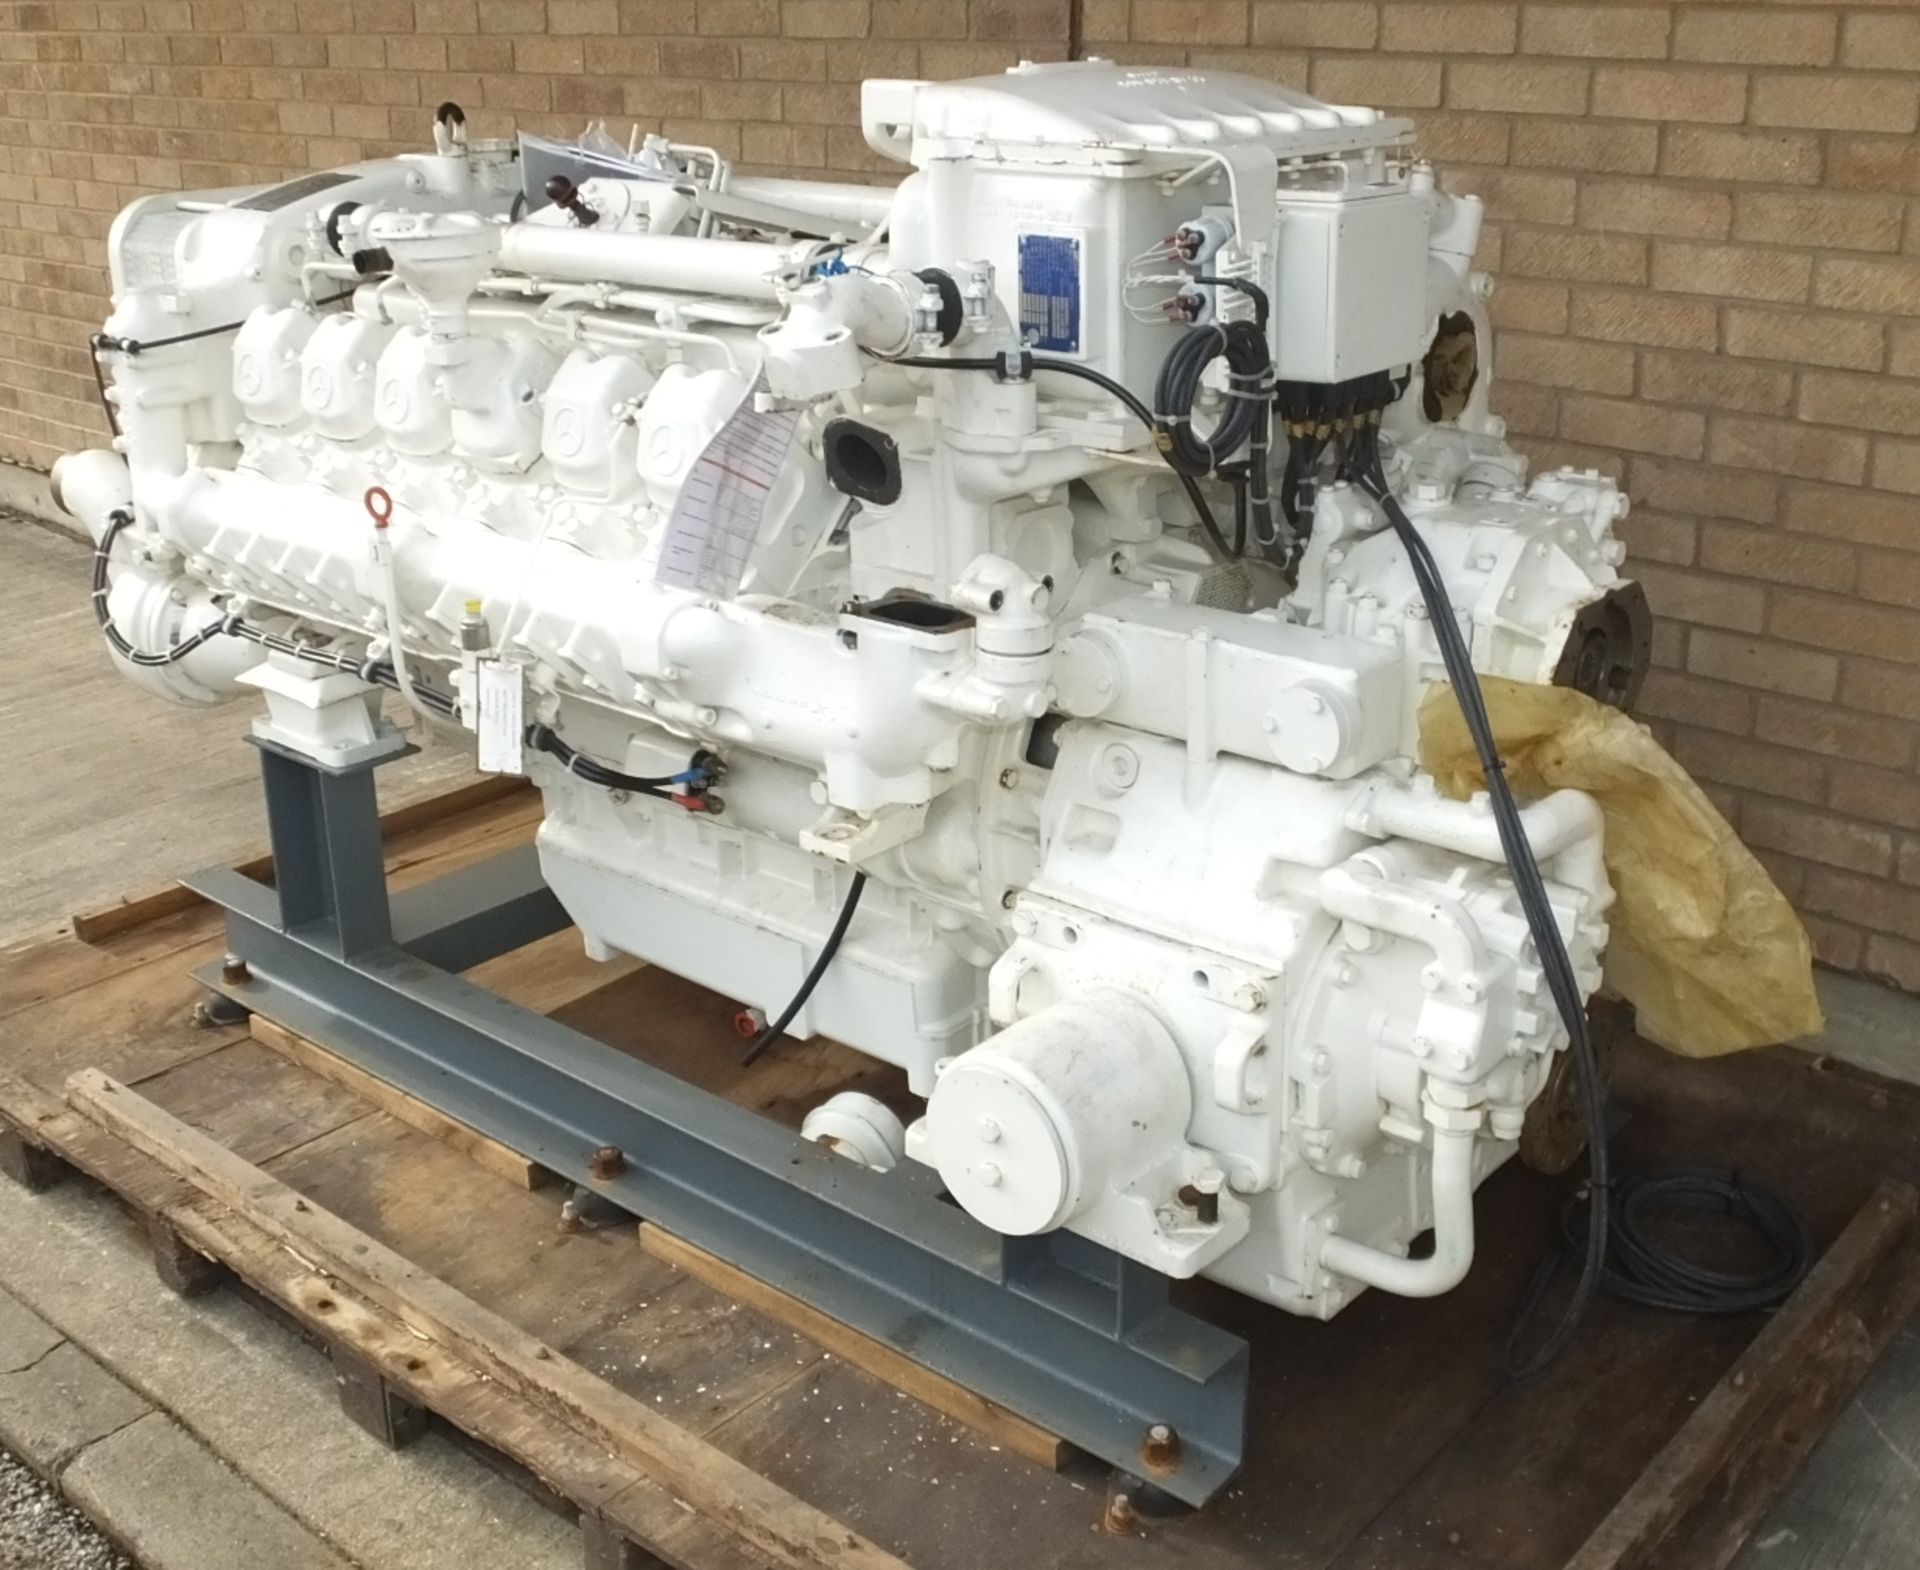 MTU 12V 183 engine - 610kW - 1310HP - 2100 RPM - looks to have only done test hours - very clean - Image 22 of 37